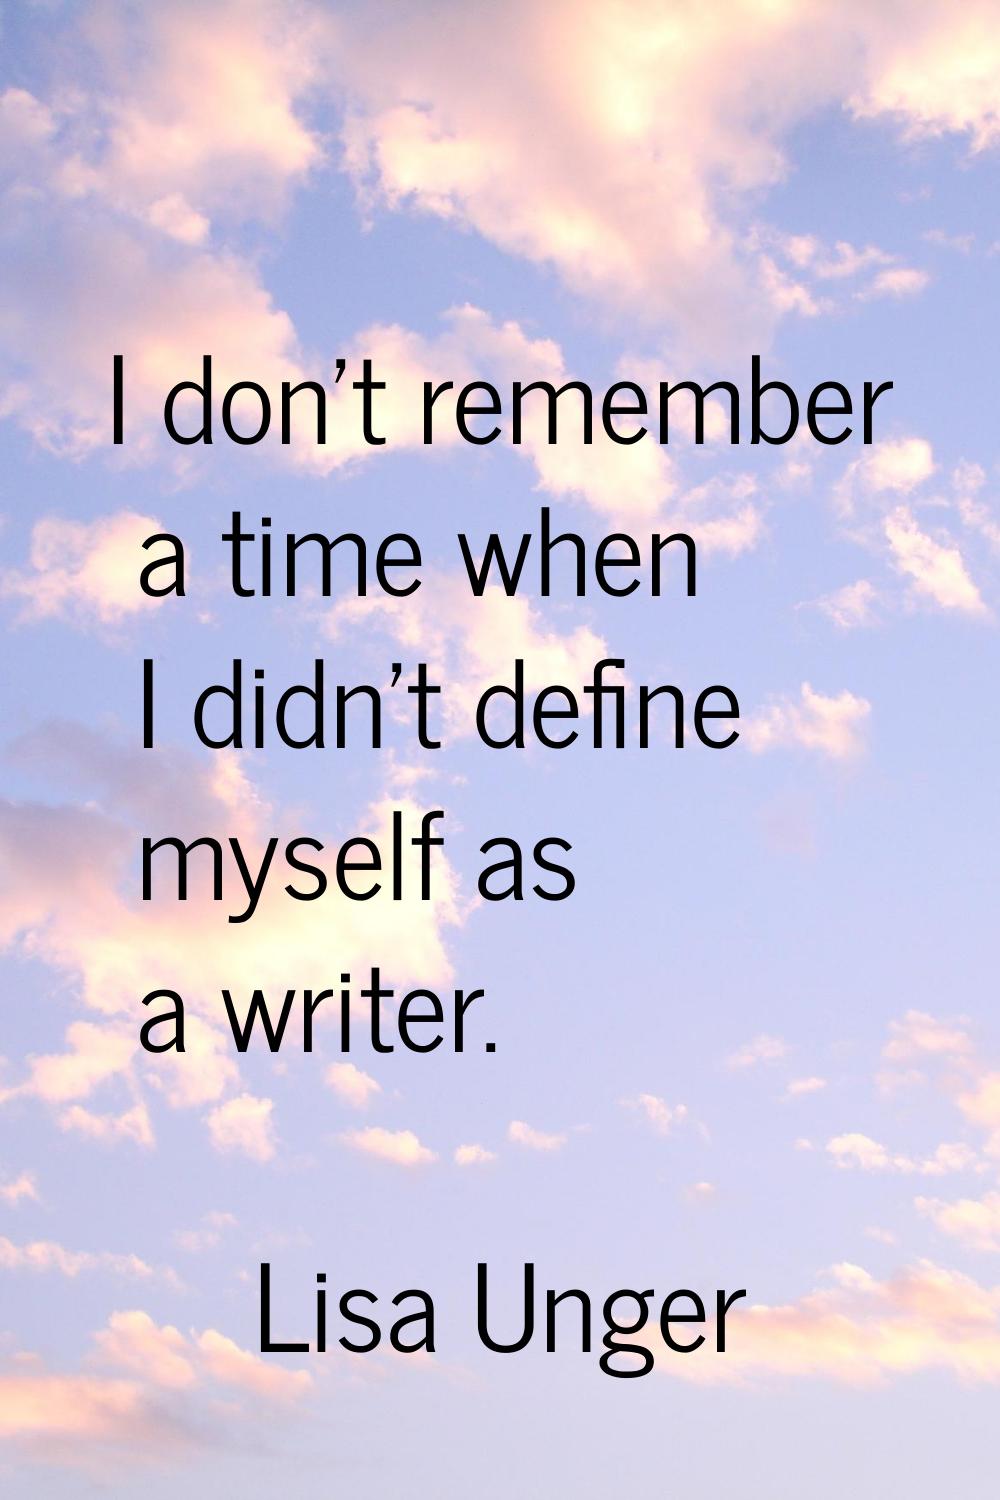 I don't remember a time when I didn't define myself as a writer.